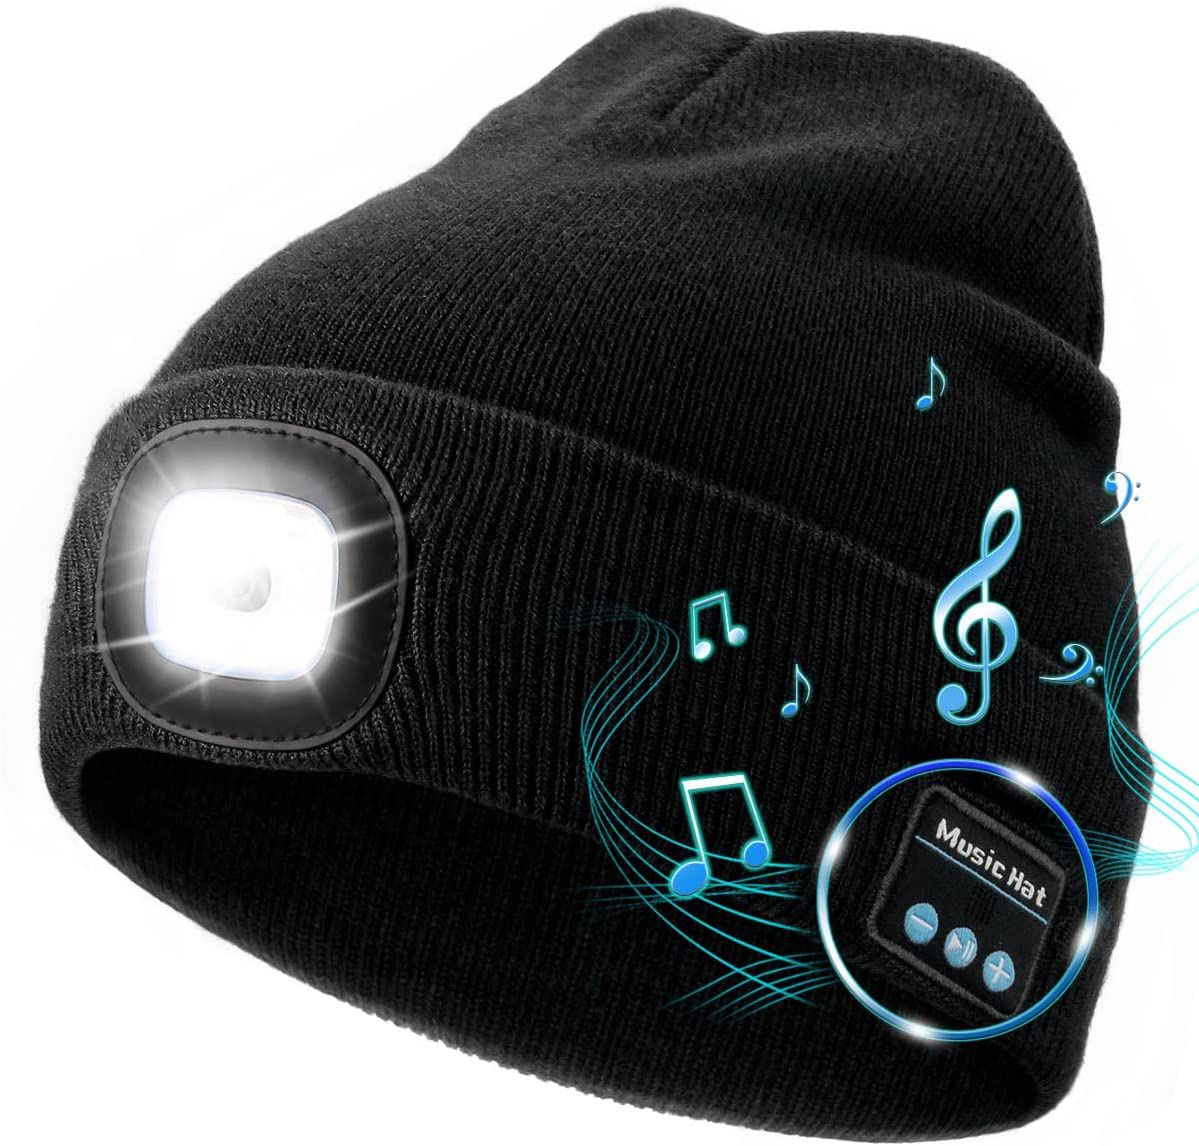 Unisex Bluetooth Beanie Hat with Light and Built-in Stereo Speakers & Mic